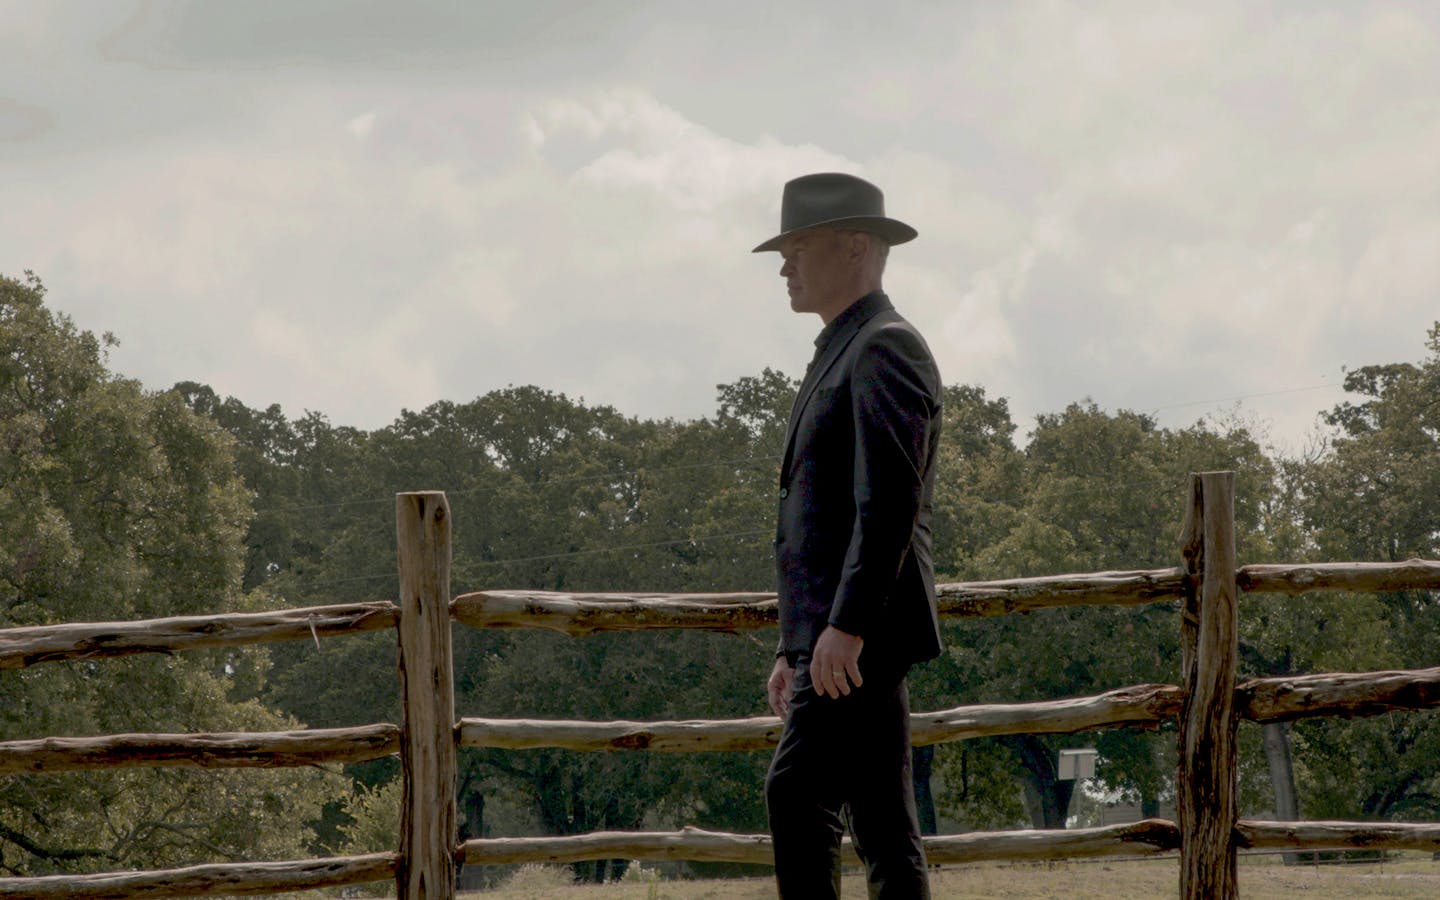 Looking at Red Stone (2021) and Boon (2022) with Neal McDonough – The  Action Elite